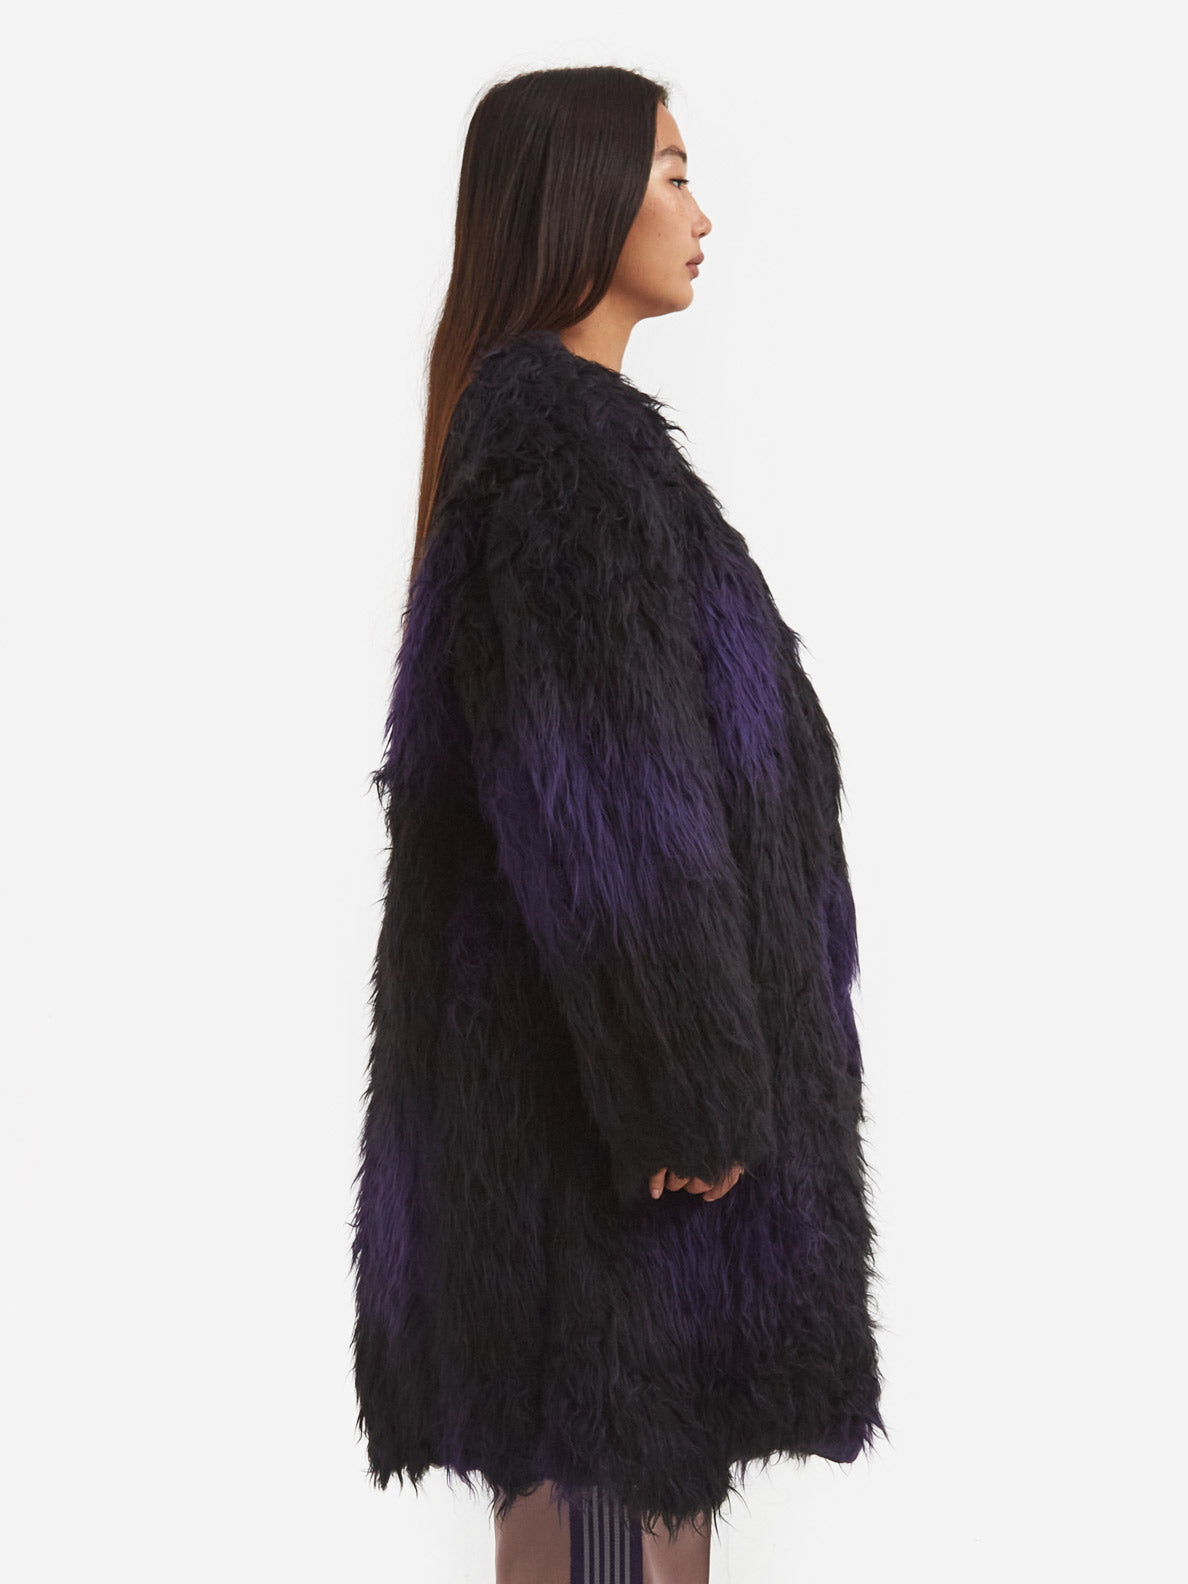 Needles Gown Coat - Arylic Fur/blurred Dot